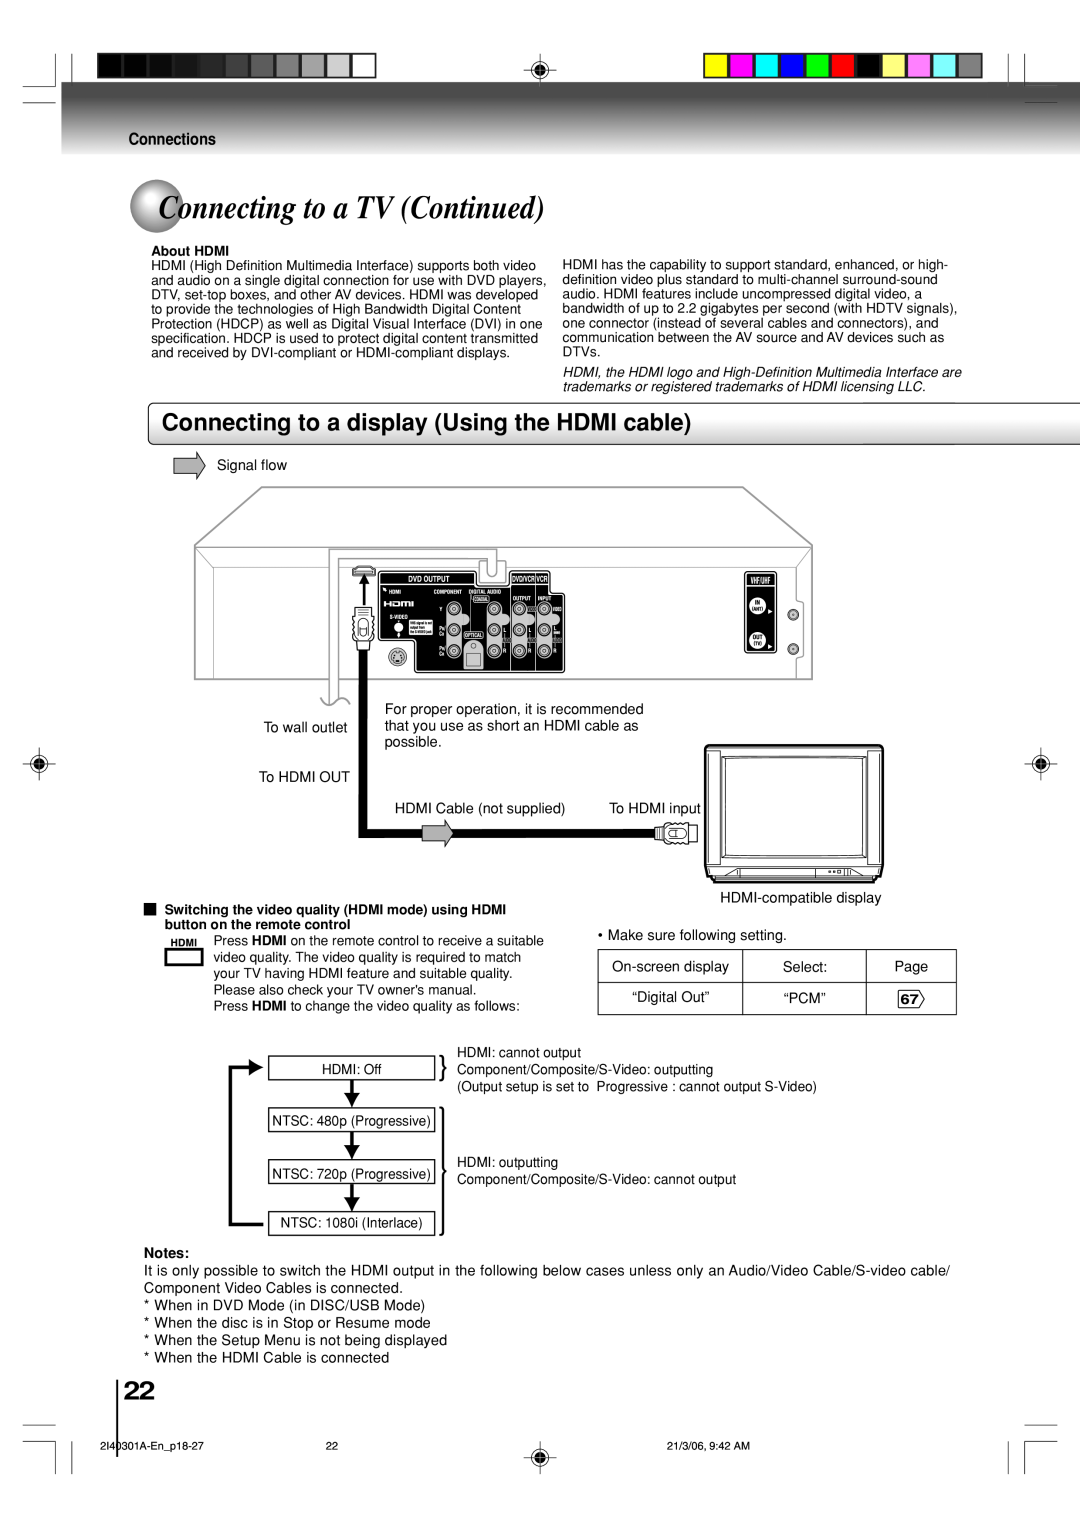 Toshiba SD-V594SC owner manual Connecting to a display Using the HDMI cable, Connecting to a TV Continued, Notes 